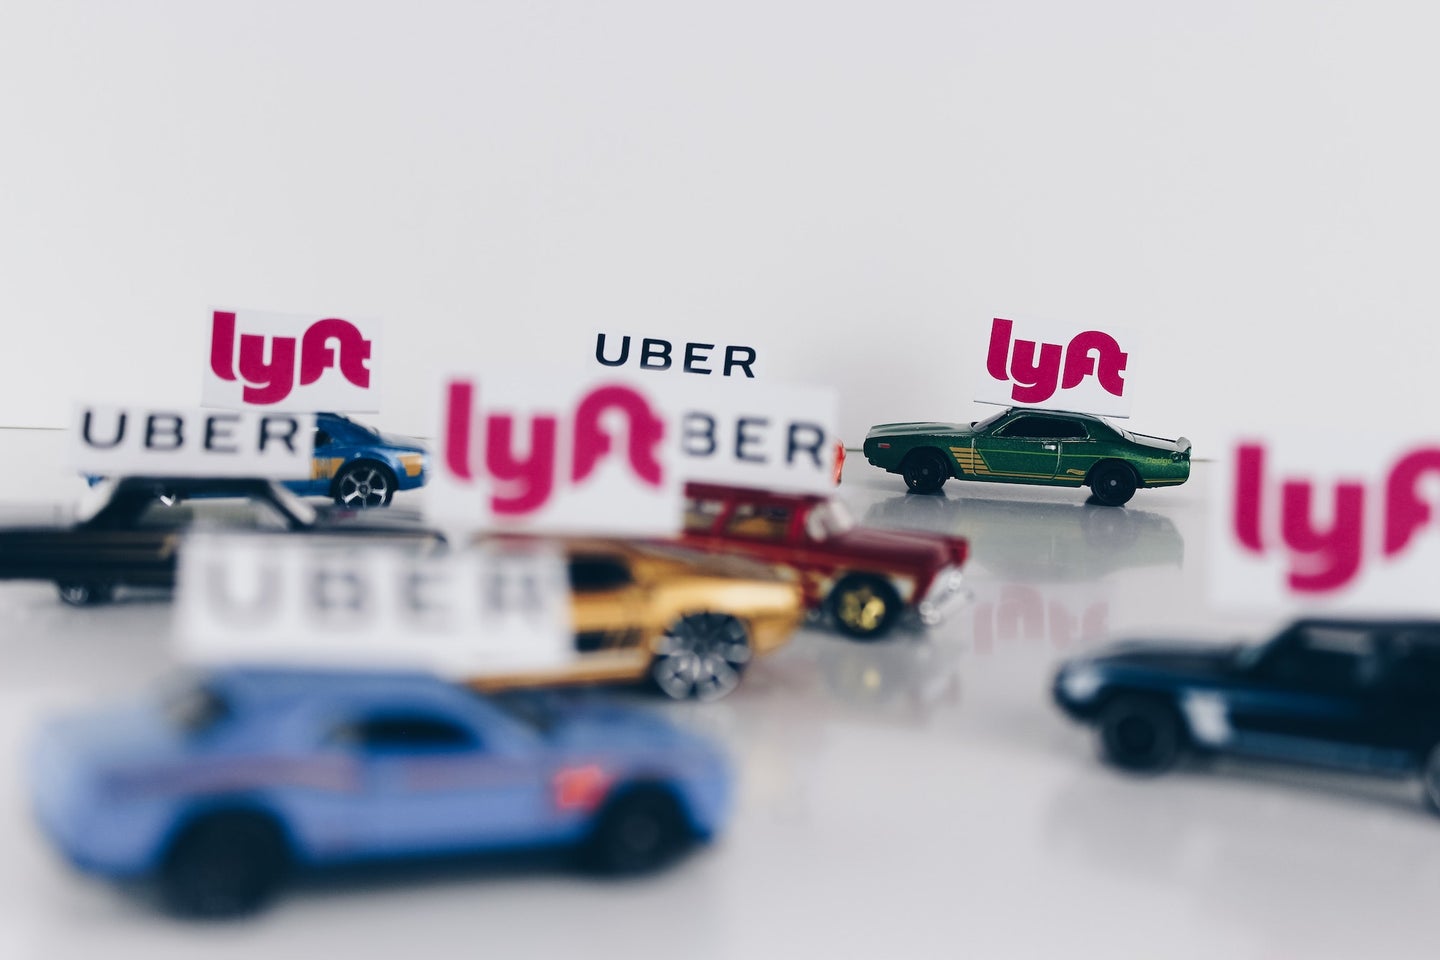 Uber and Lyft signs on tiny cars.